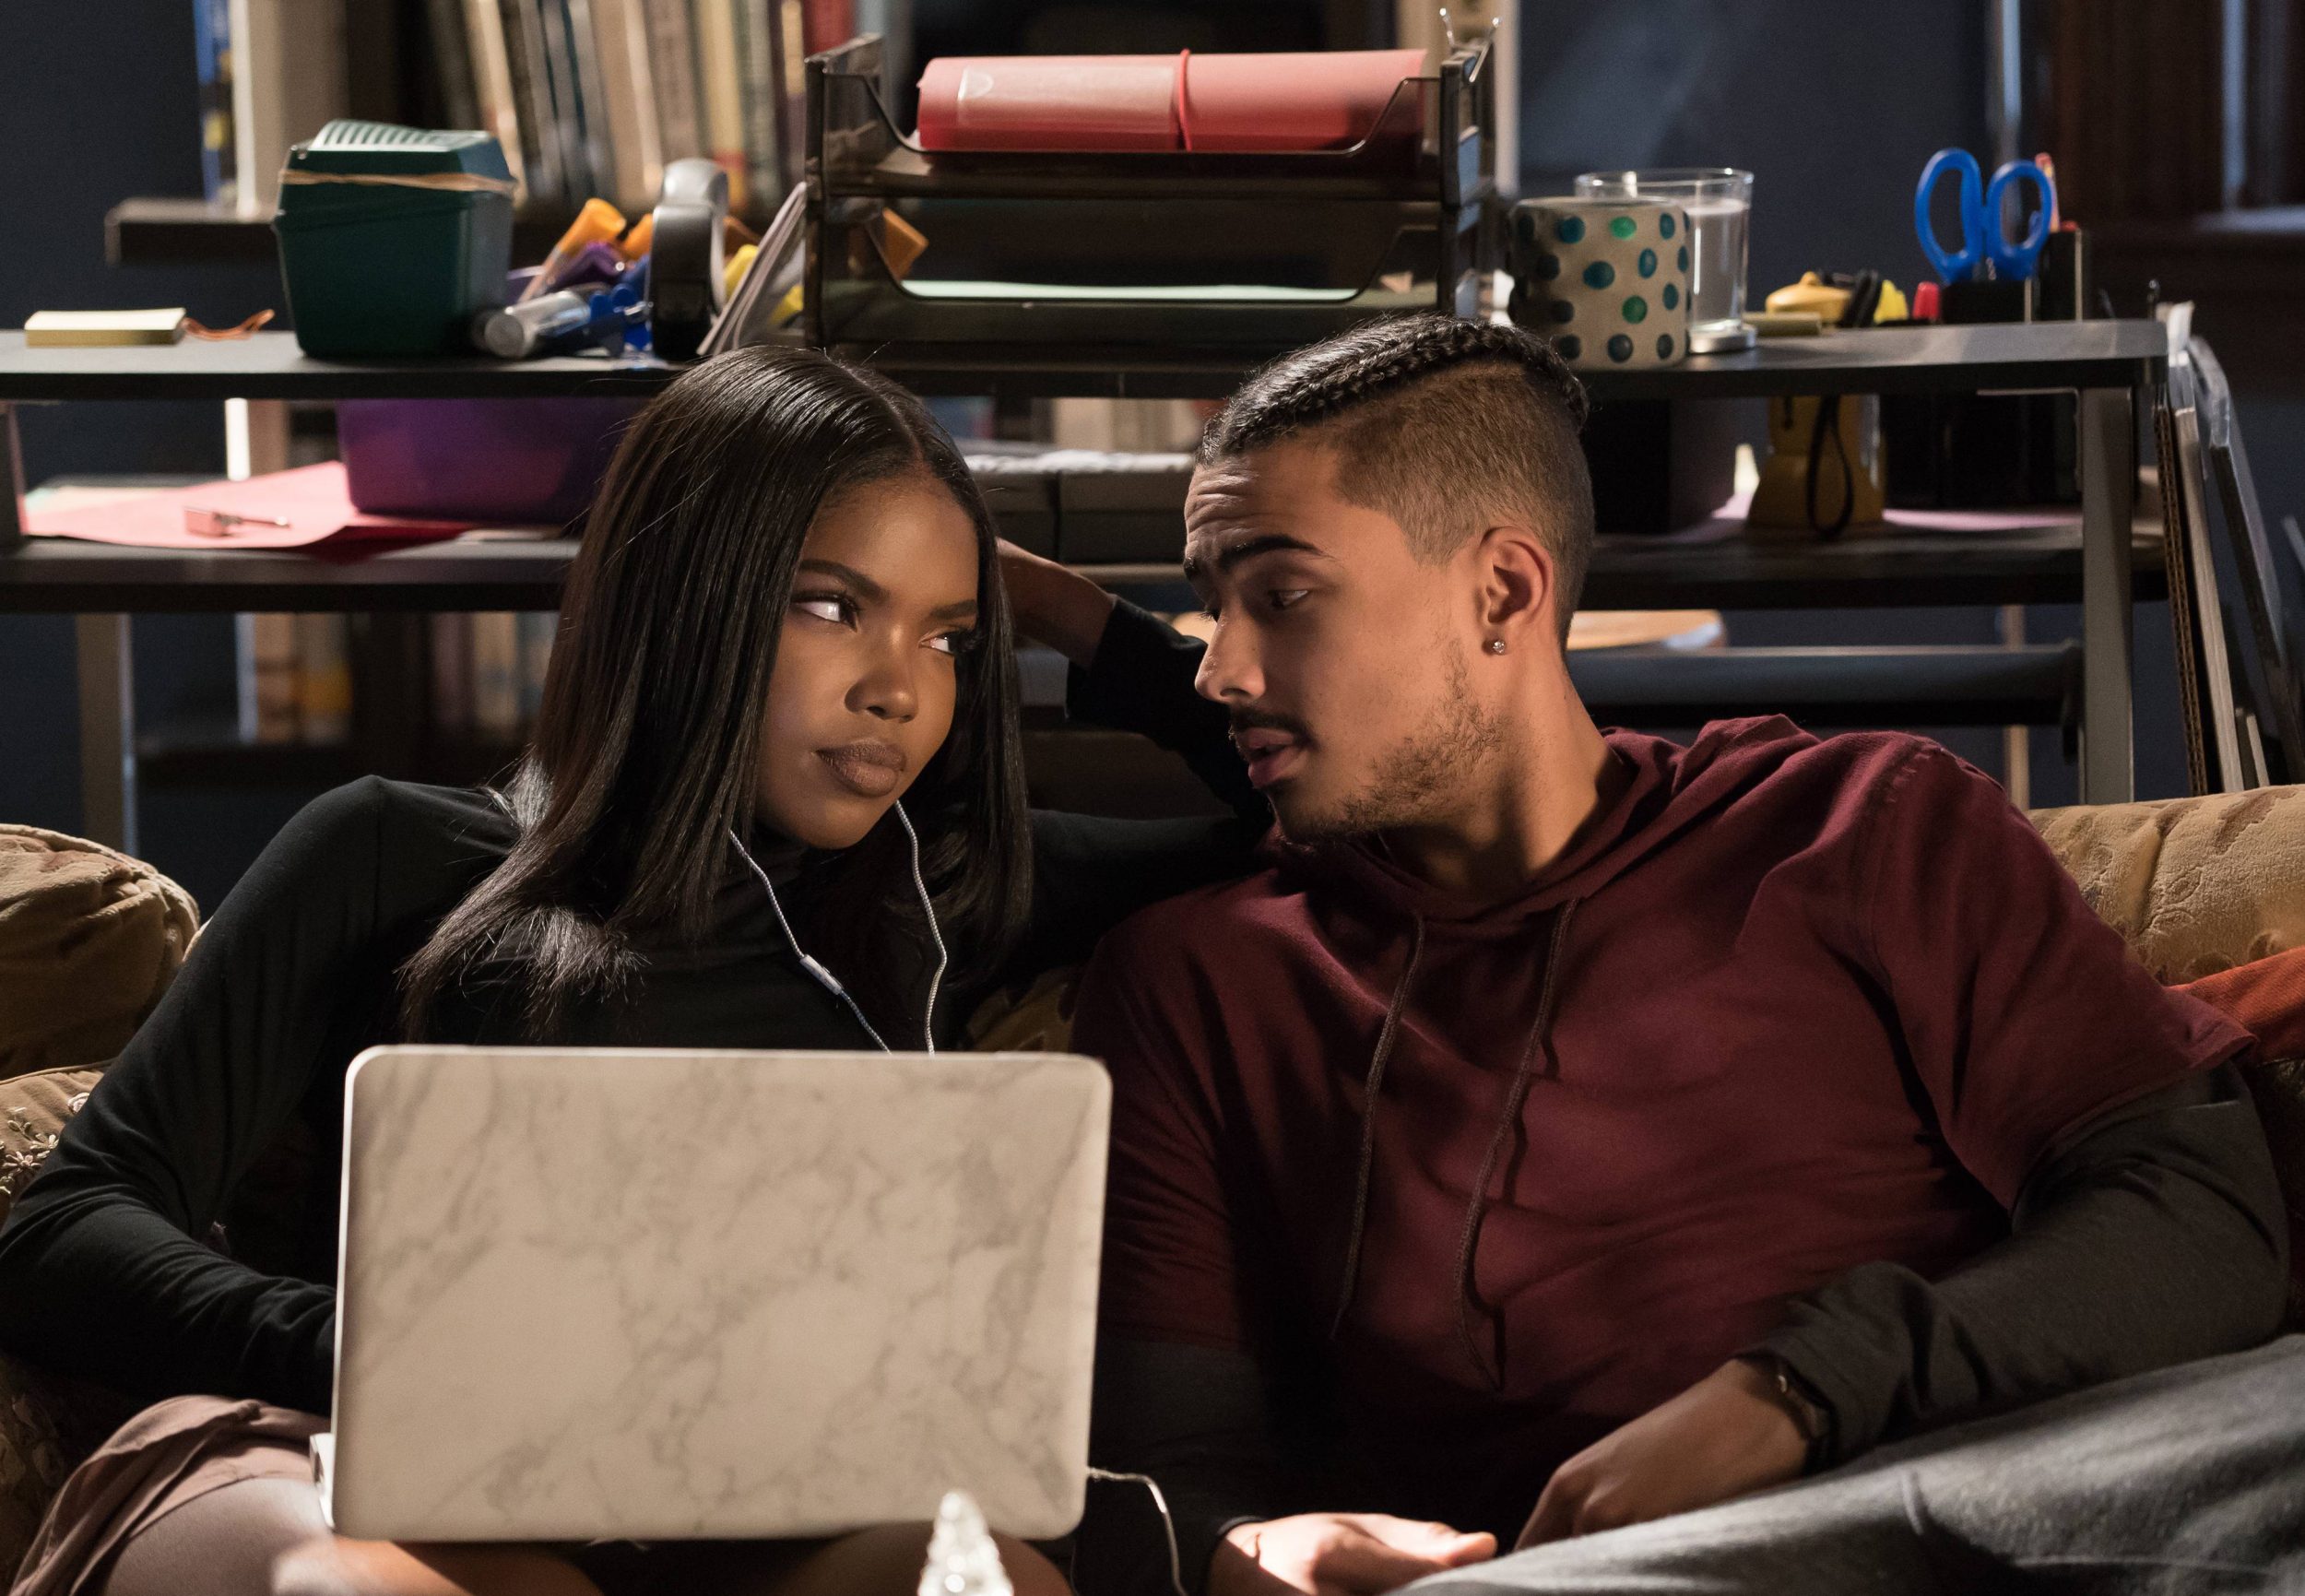 STAR: Pictured L-R: Ryan Destiny and Quincy Brown in the "Infamous" episode of STAR airing Wednesday, Feb. 1 (9:00-10:00 PM ET/PT) on FOX. ©2017 Fox Broadcasting Co. CR: Annette Brown/FOX